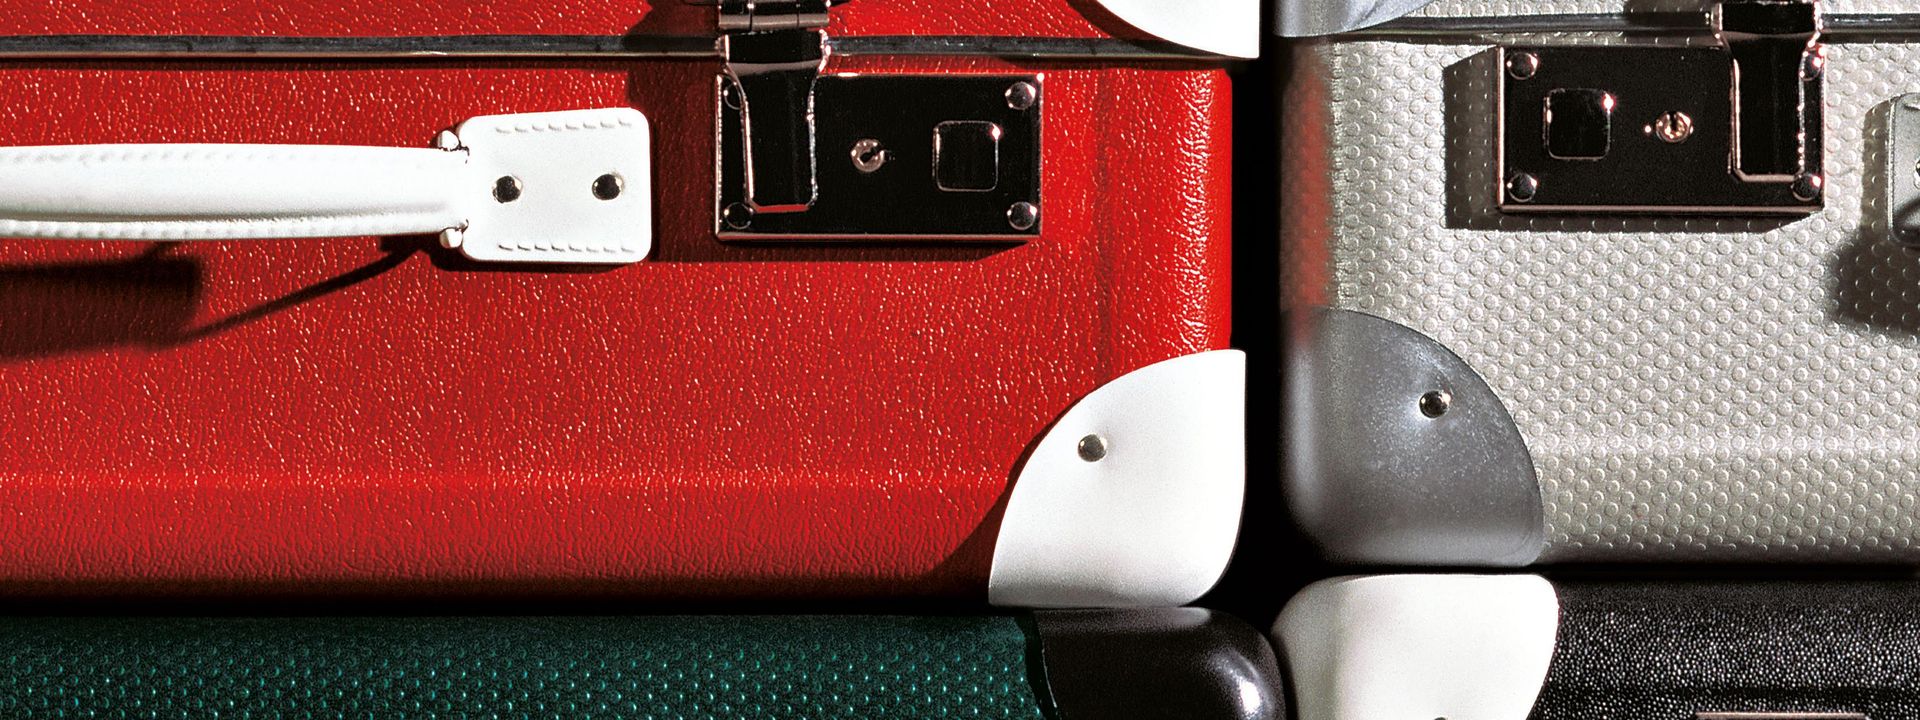 Close-up of four suitcases stacked on top of one another. One suitcase is red with white corners; one is grey with silver corners; one is black with white corners; and one is green with black corners.